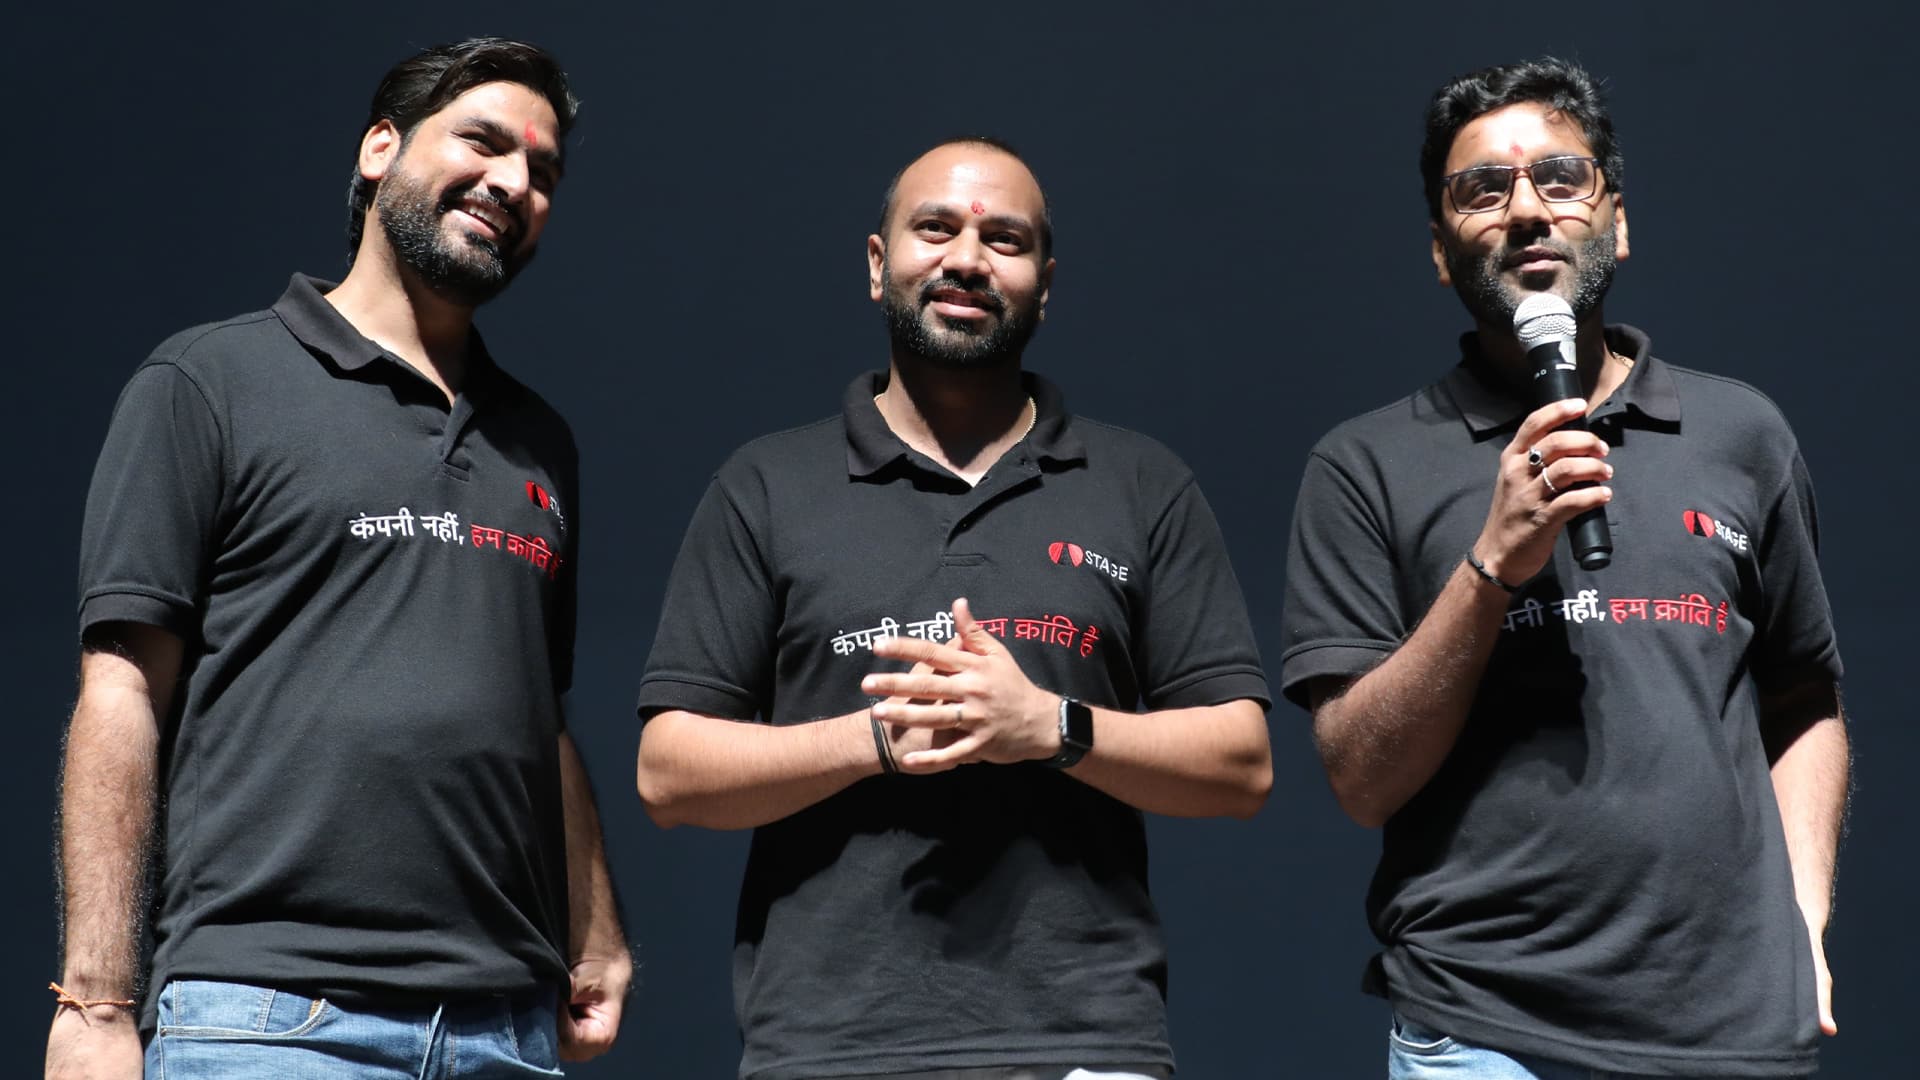 Dialect-based OTT platform STAGE raises Rs 40 cr in funding round led by Blume Ventures